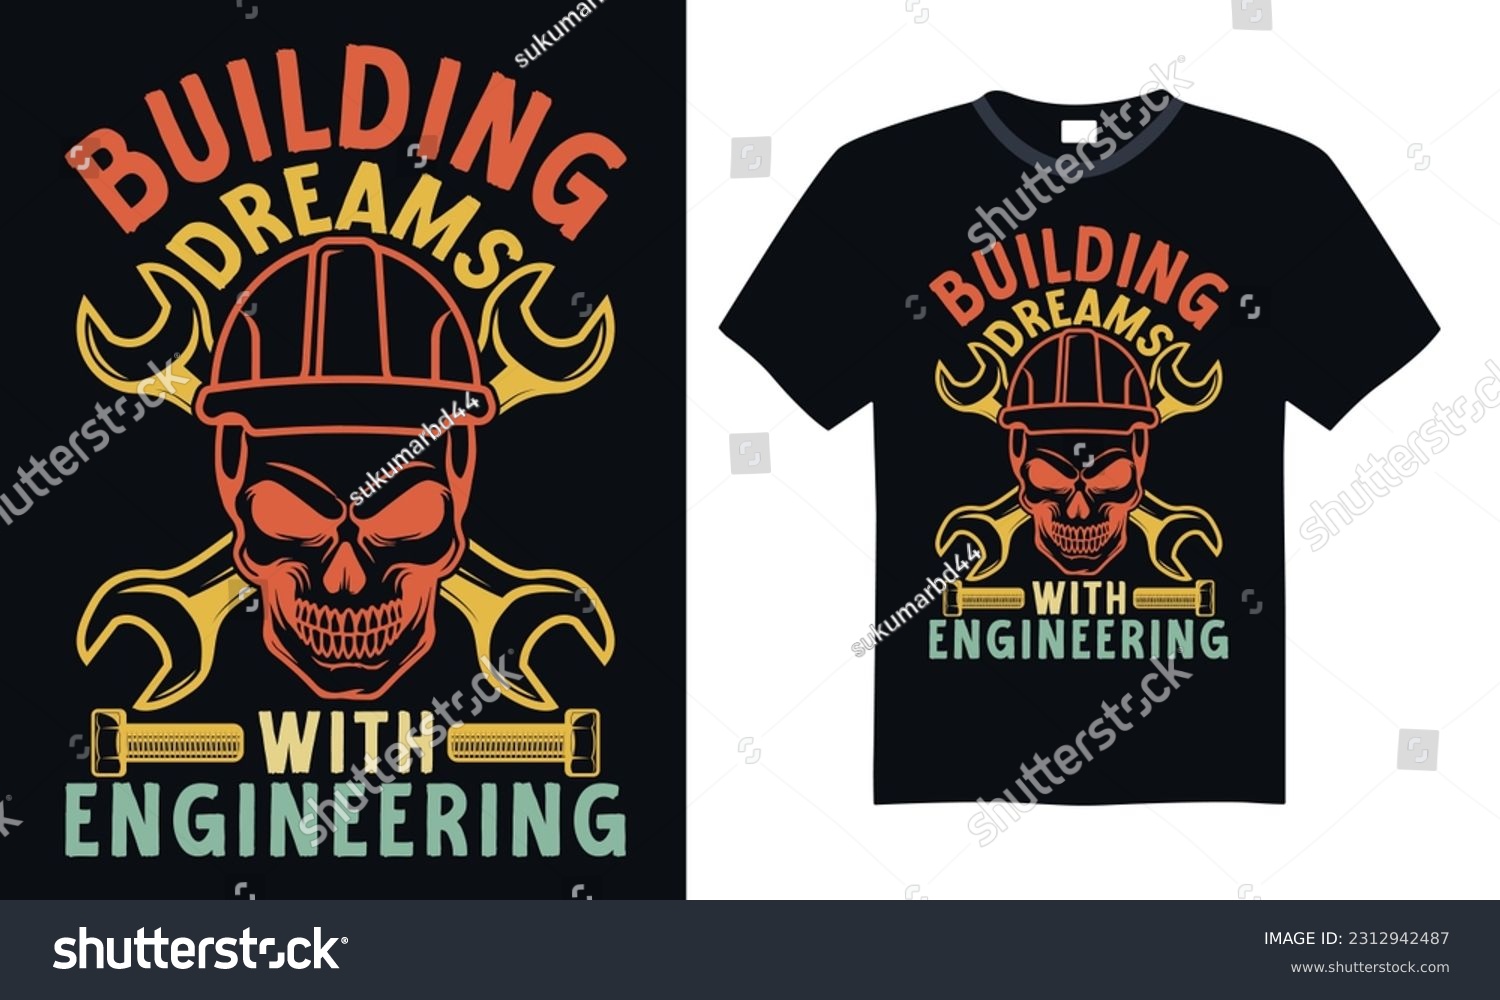 SVG of Building Dreams with Engineering - Engineering T-shirt Design, SVG Files for Cutting, Handmade calligraphy vector illustration, Hand written vector sign svg